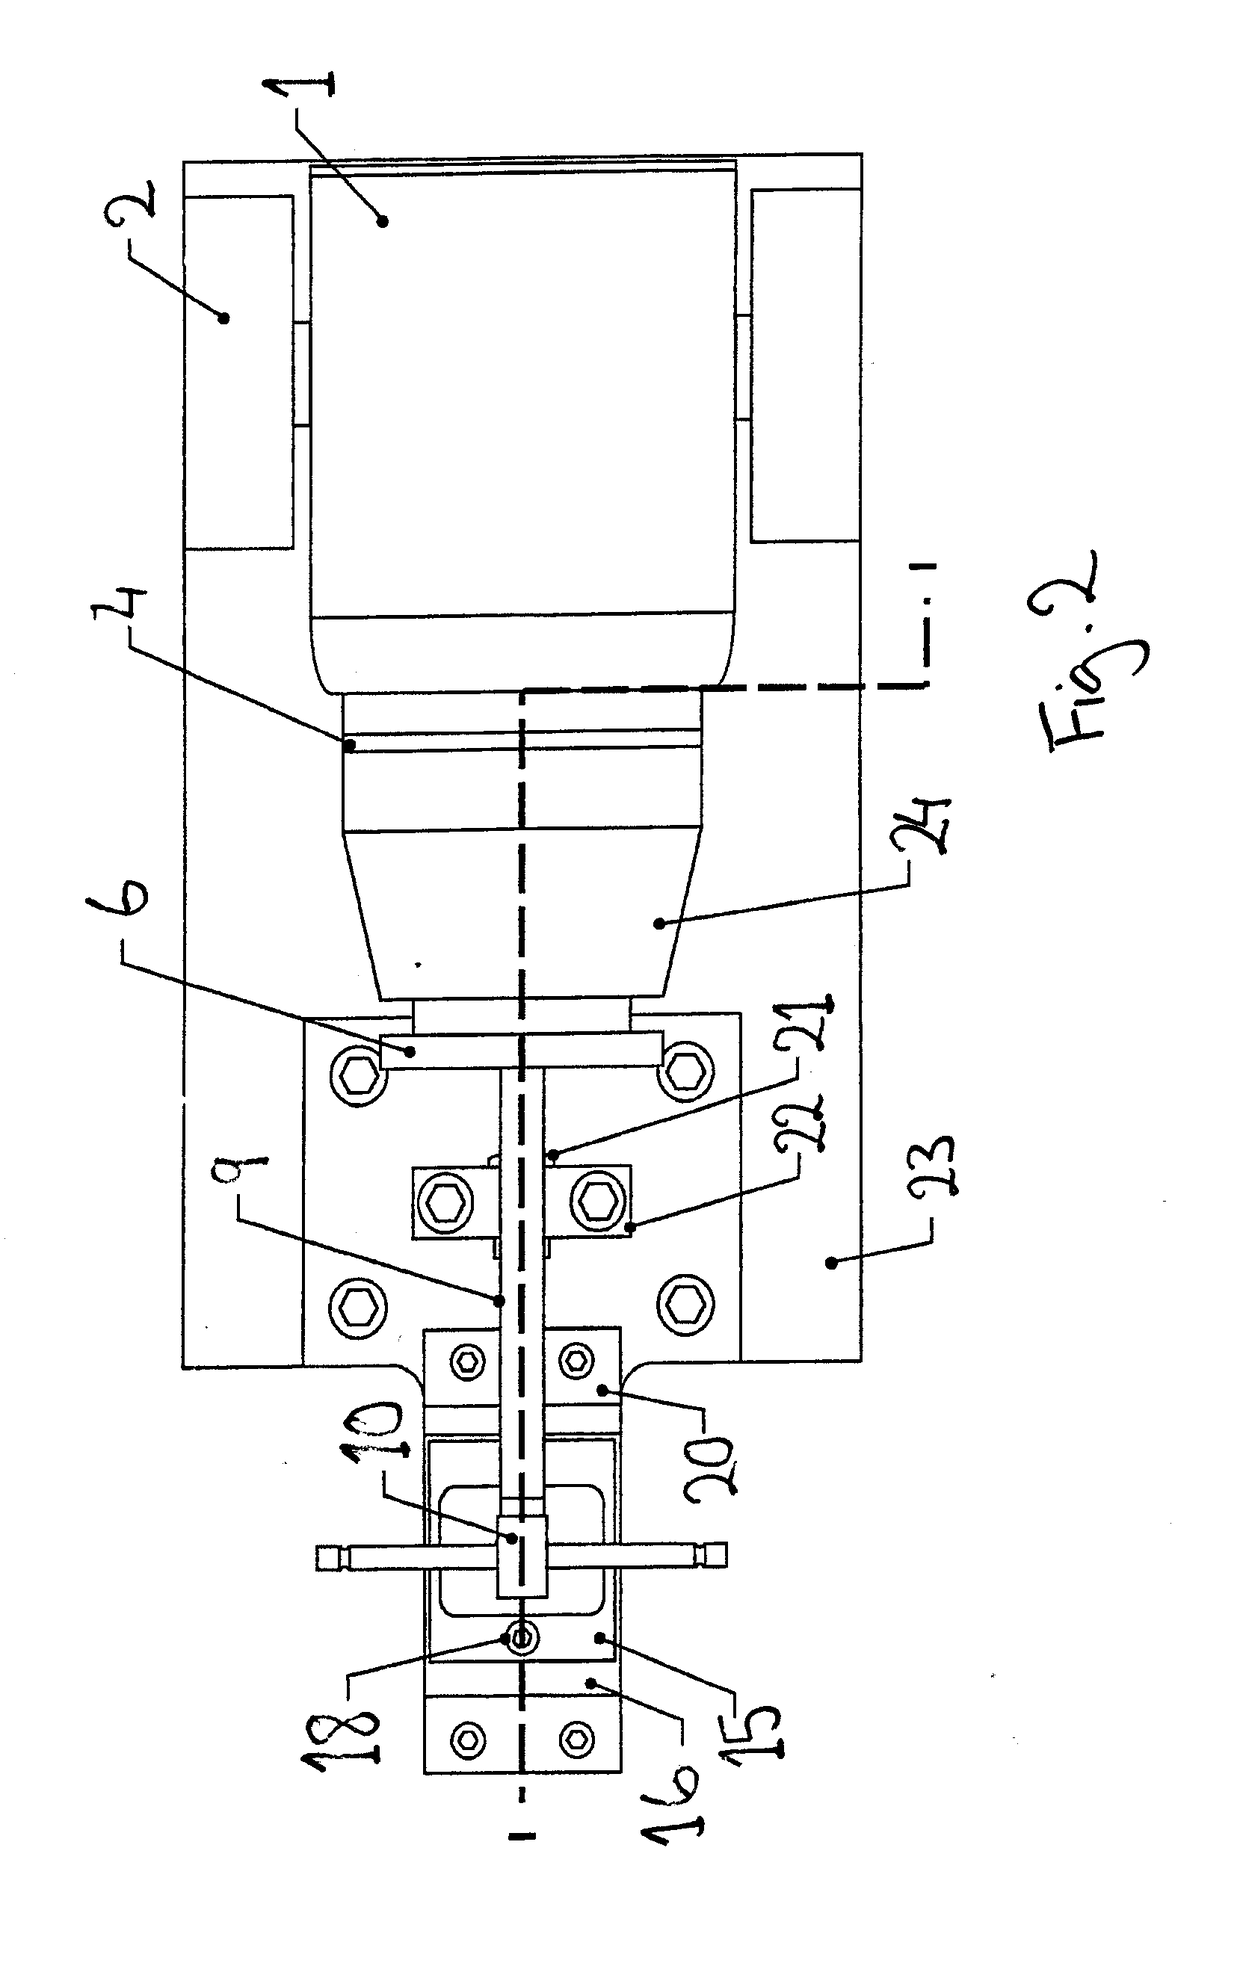 Friction testing apparatus and method